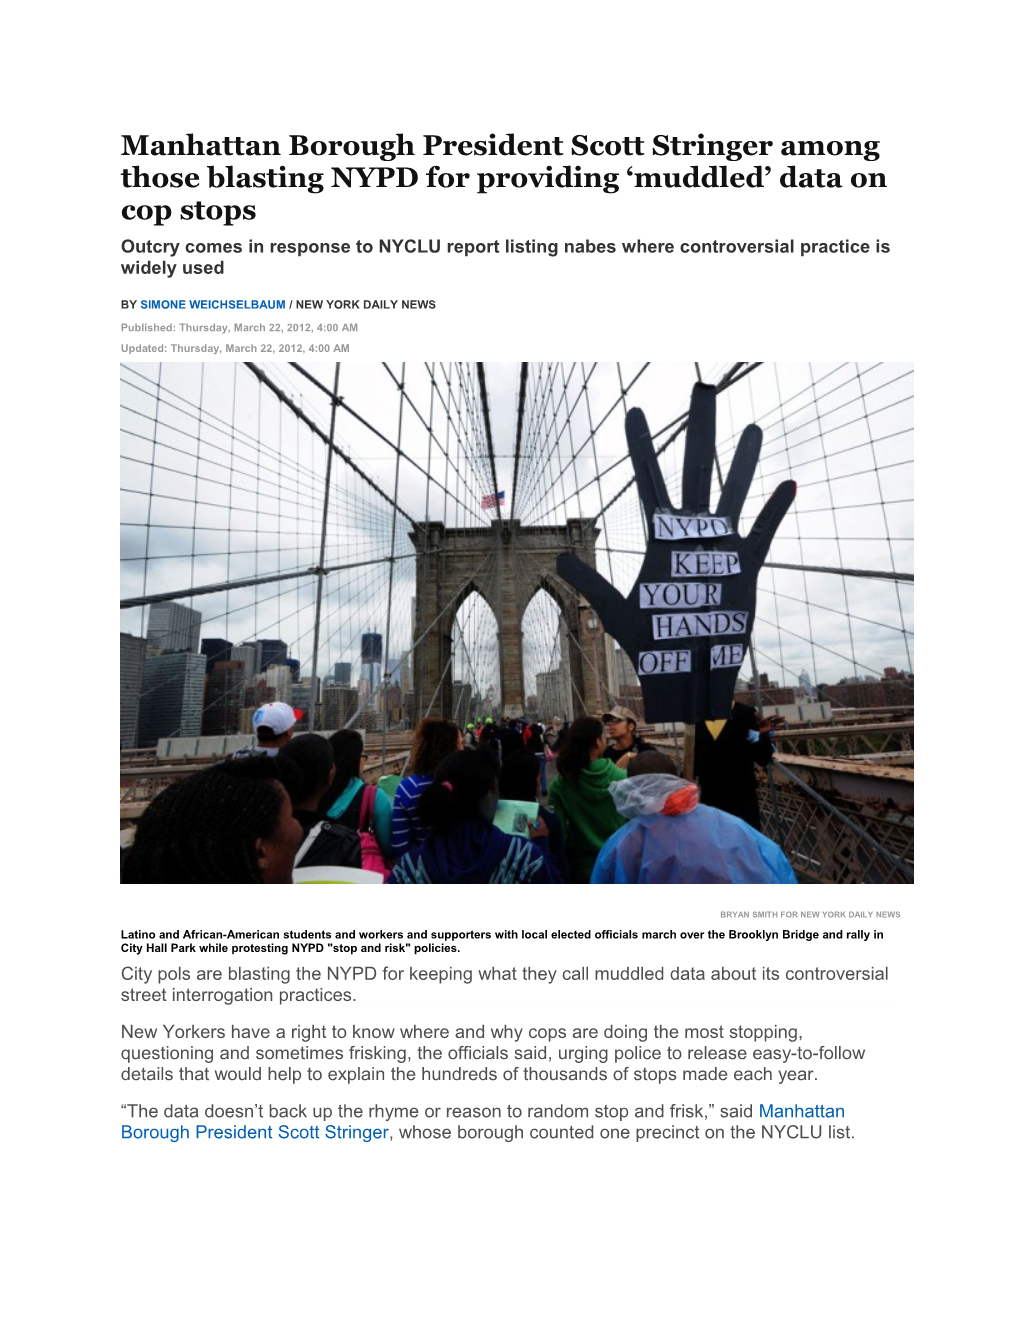 Outcry Comes in Response to NYCLU Report Listing Nabes Where Controversial Practice Is